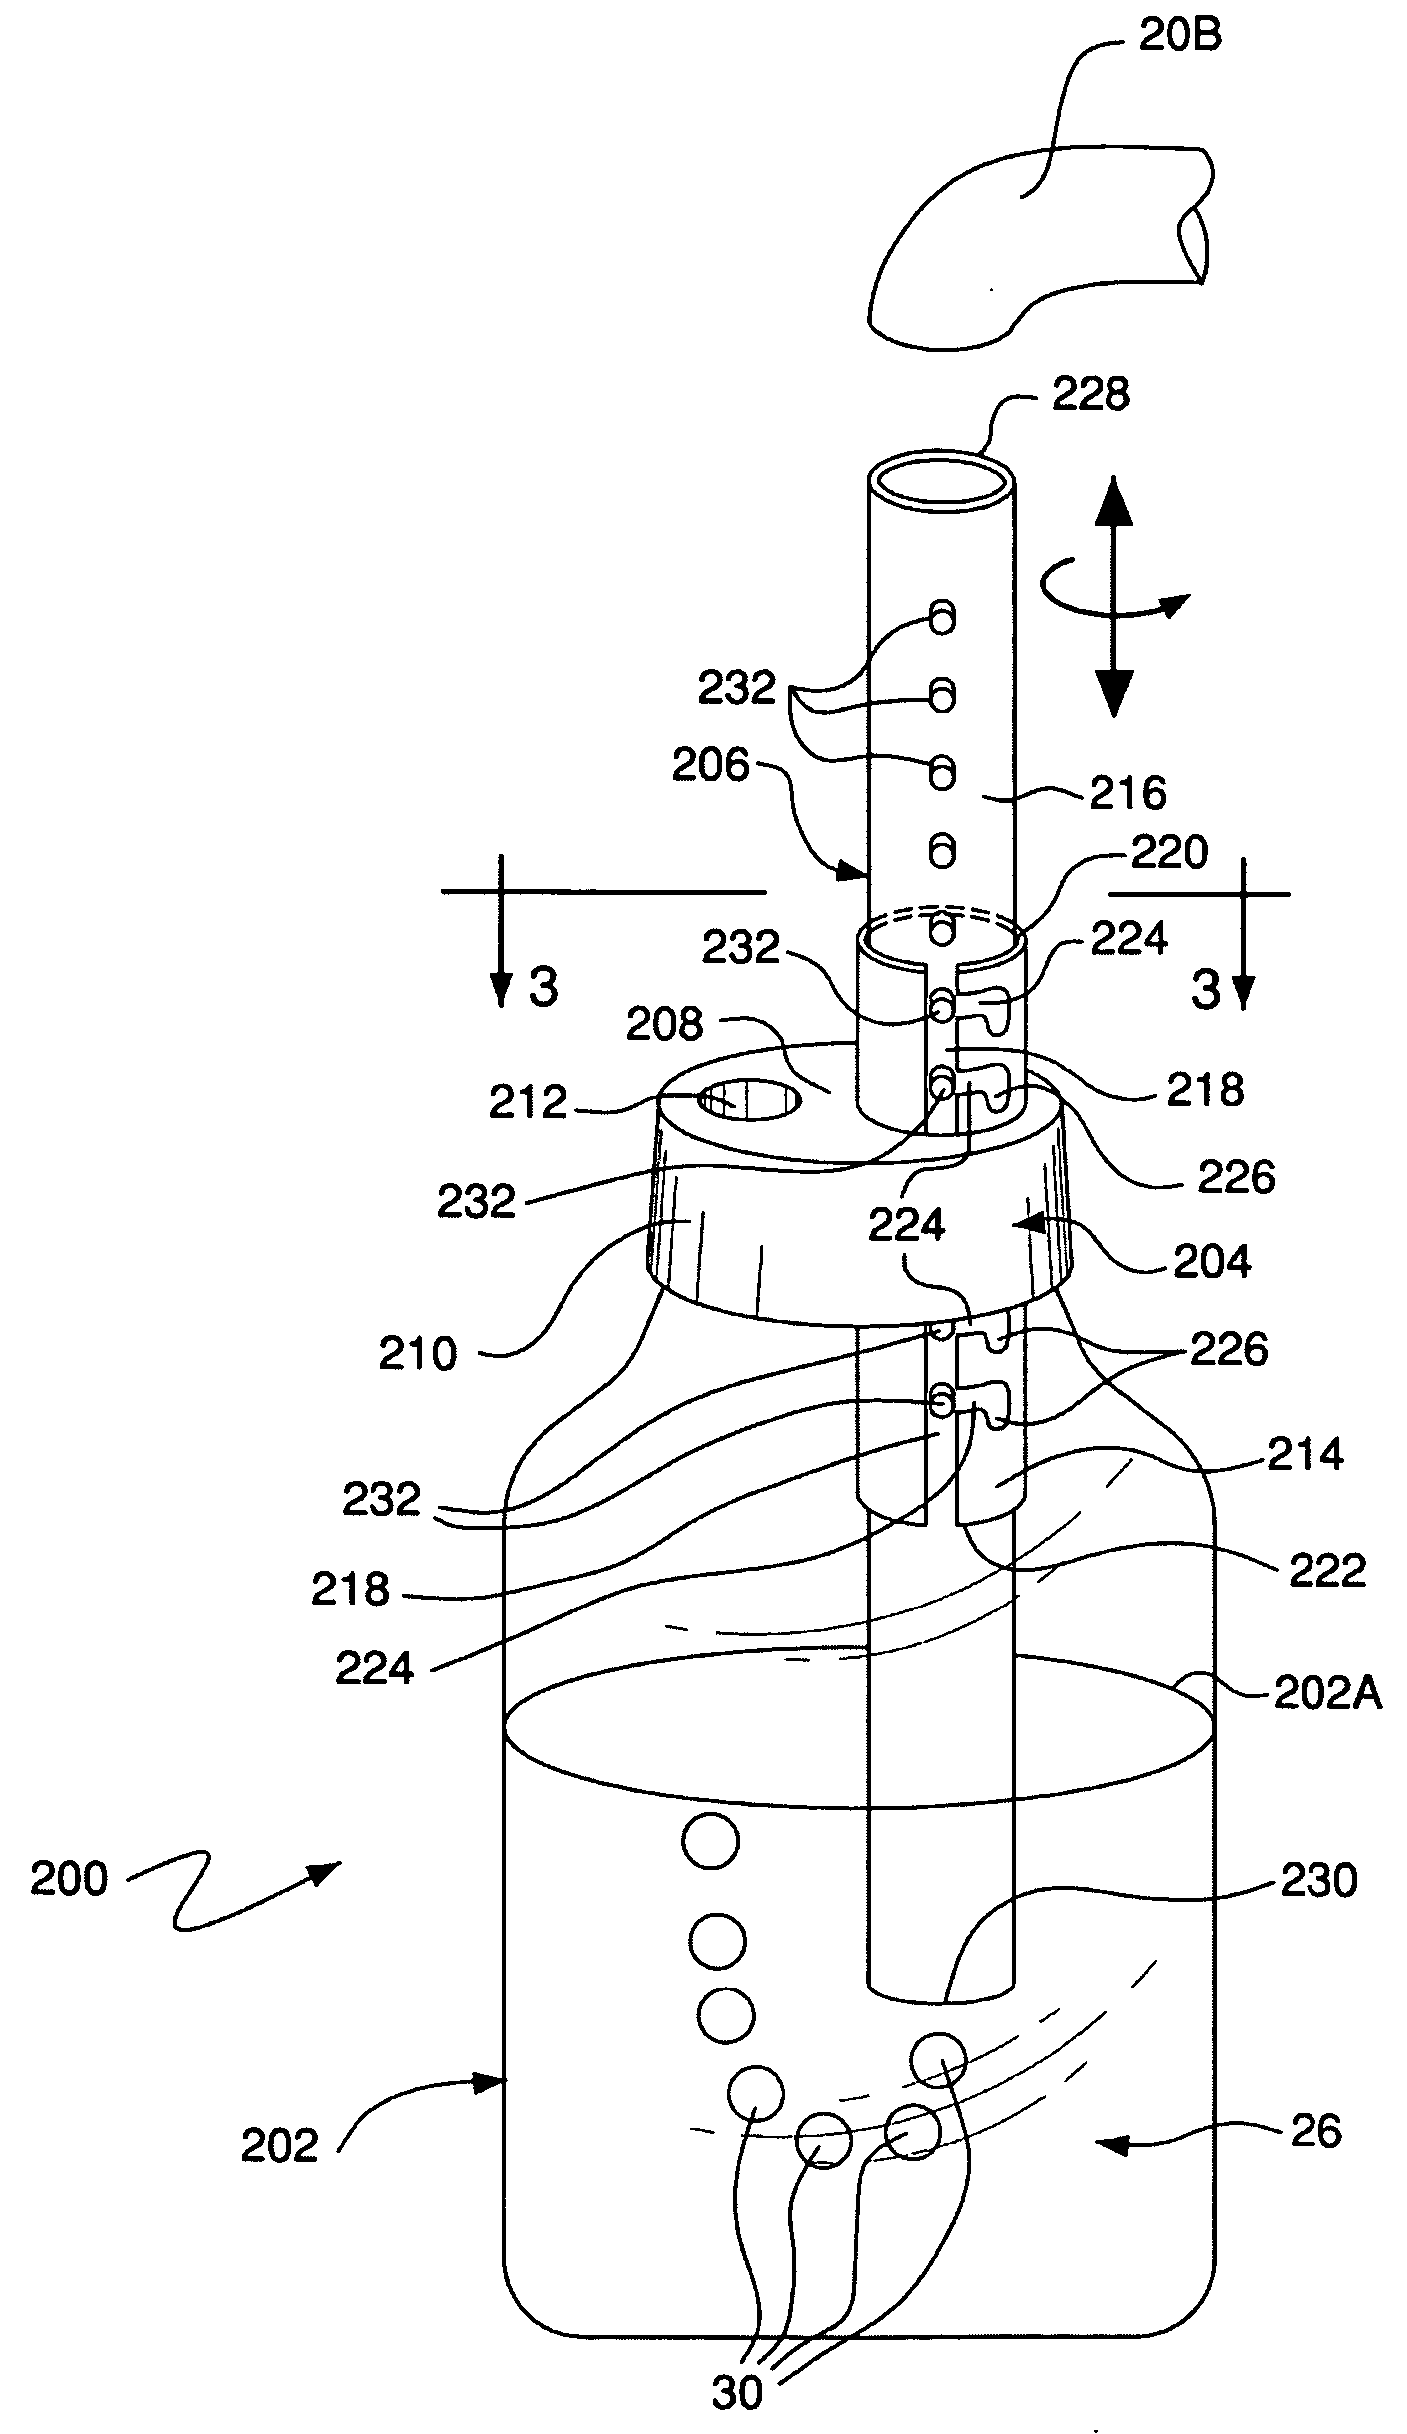 Apparatus for controlling the pressure of gas by bubbling through a liquid, such as bubble CPAP